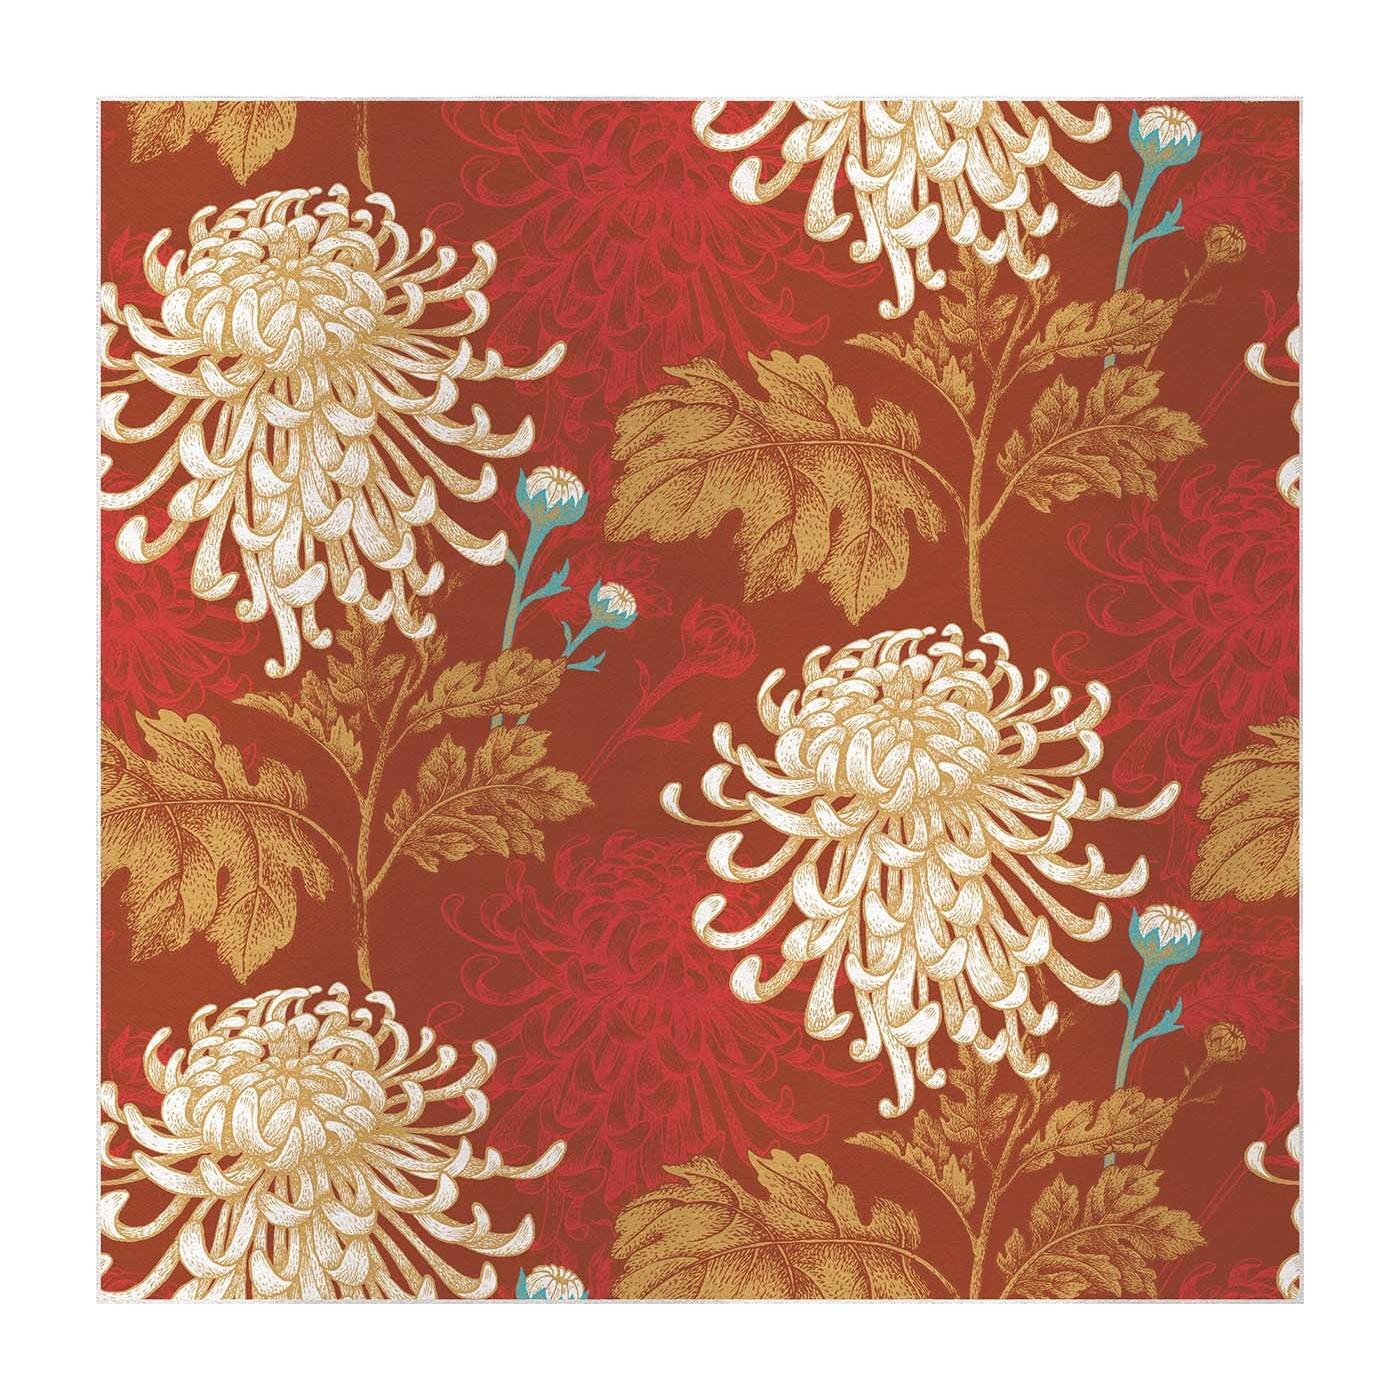 Mixed Dahlia Red Panel #1